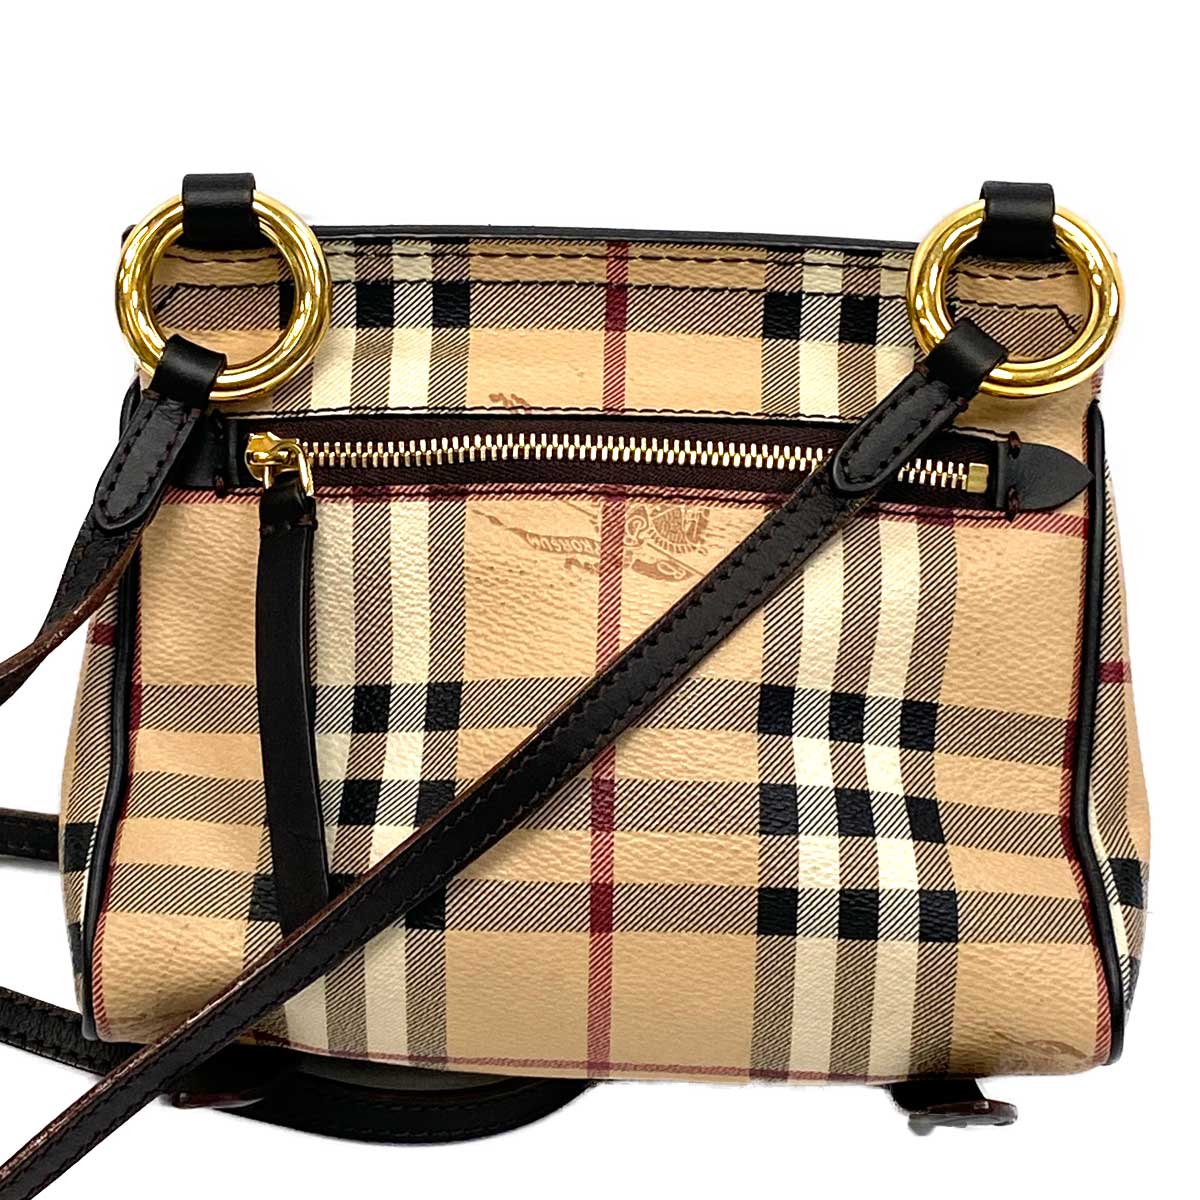 Burberry Black Leather Haymarket Check Coated Canvas Baby Bridle